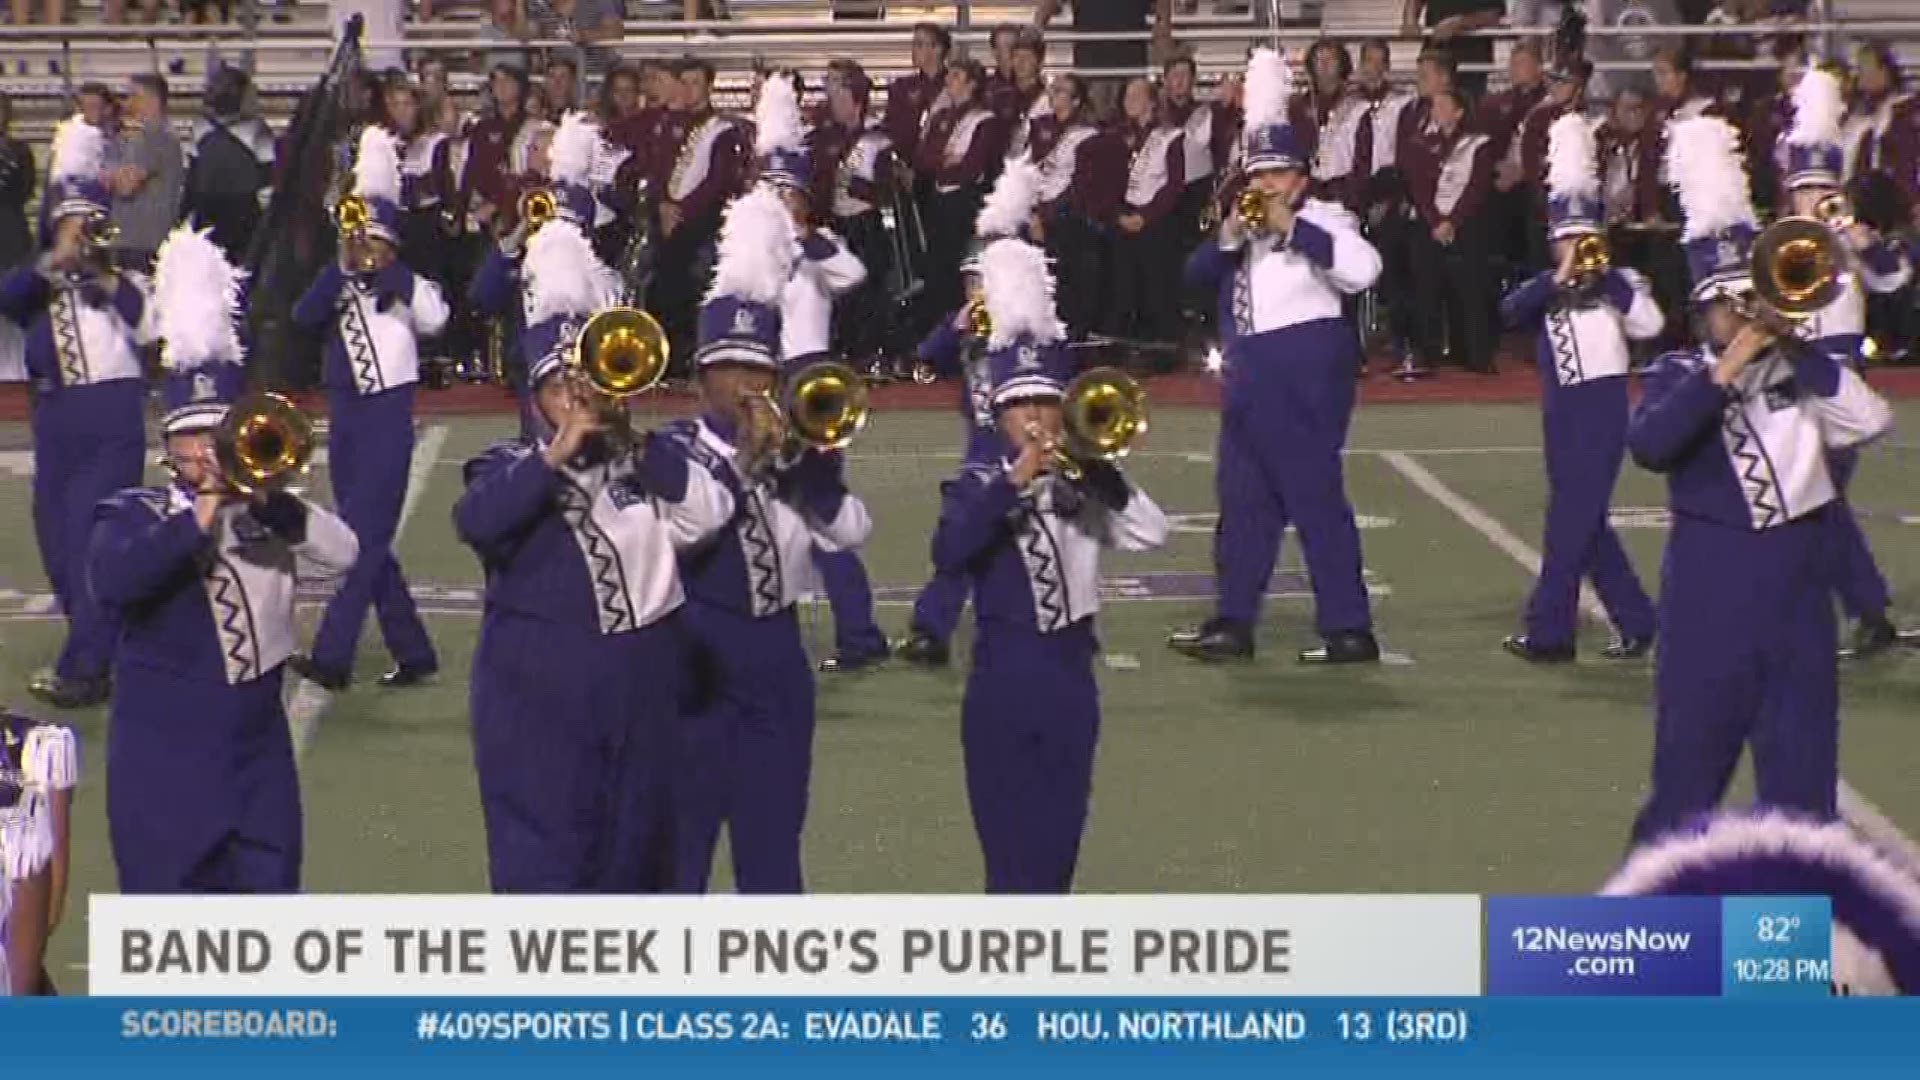 WEEK 1: The Port Neches-Groves Indian Band is the 'Band of the Week'